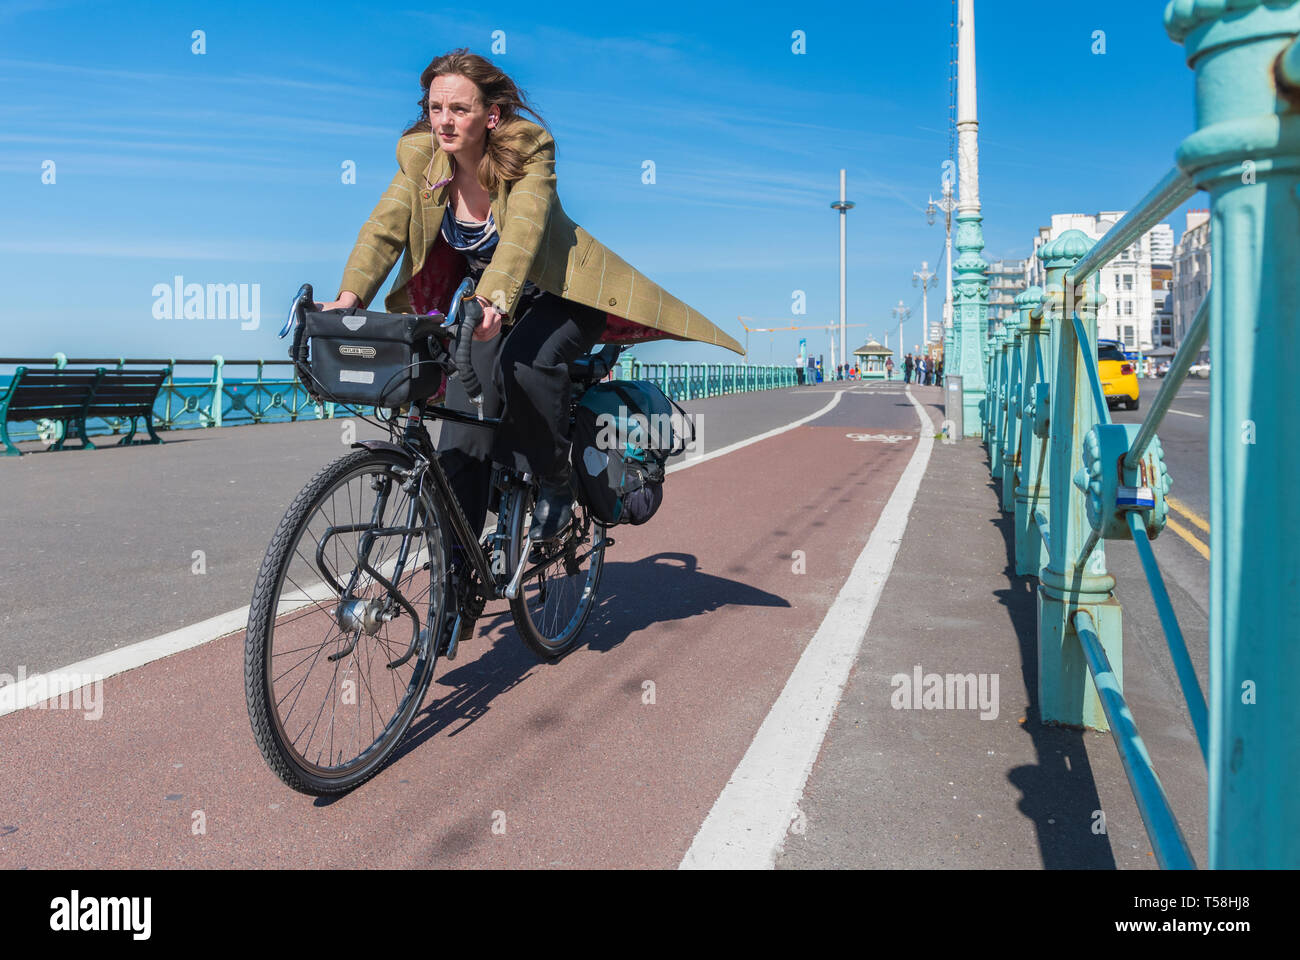 Woman in 20s dressed smartly cycling along a cycle path in Brighton, East Sussex, England, UK. Smart woman on bicycle path. Stock Photo